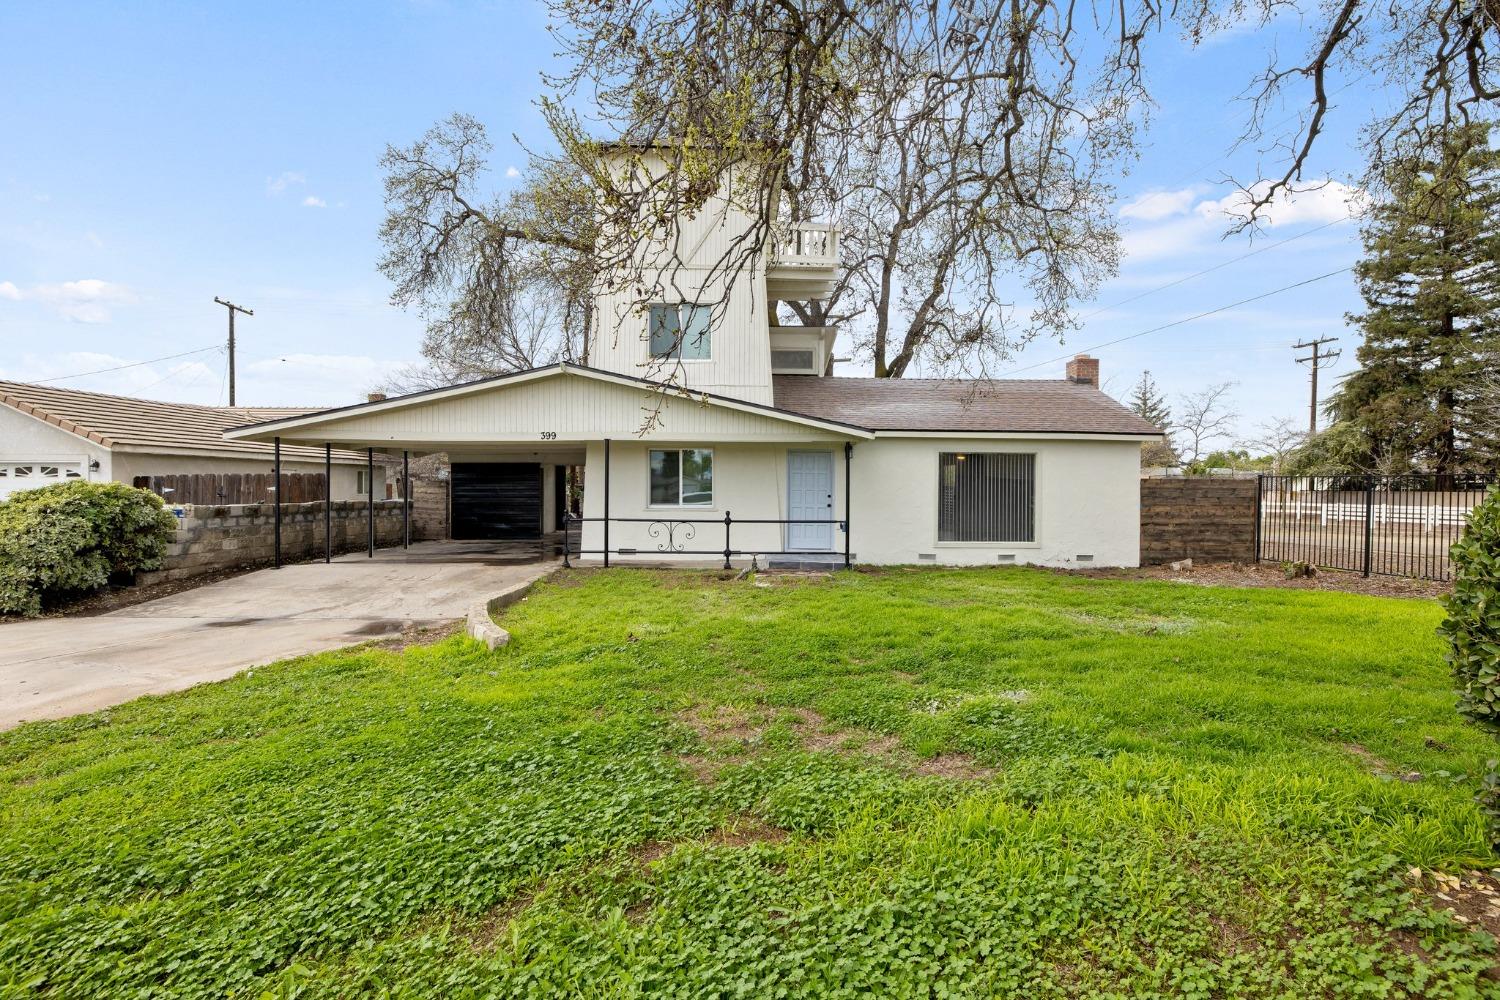 Photo of 399 N Lane St in Tulare, CA